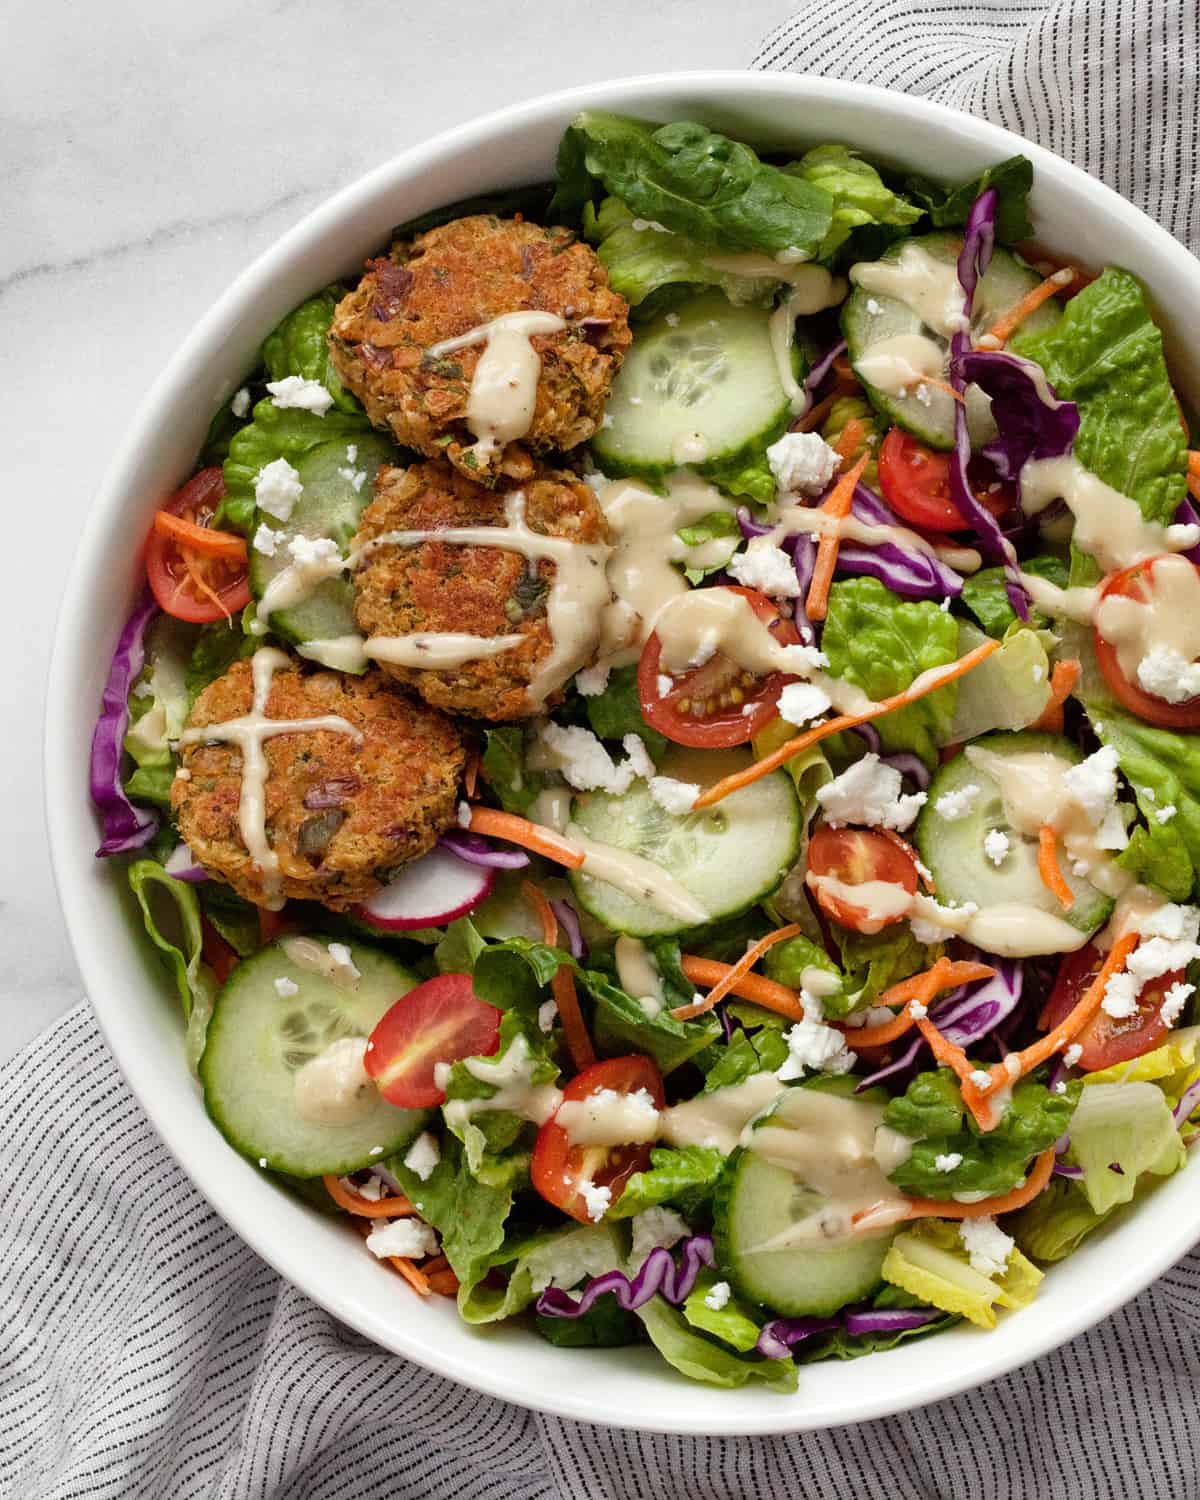 Salad with baked falafel in a bowl.